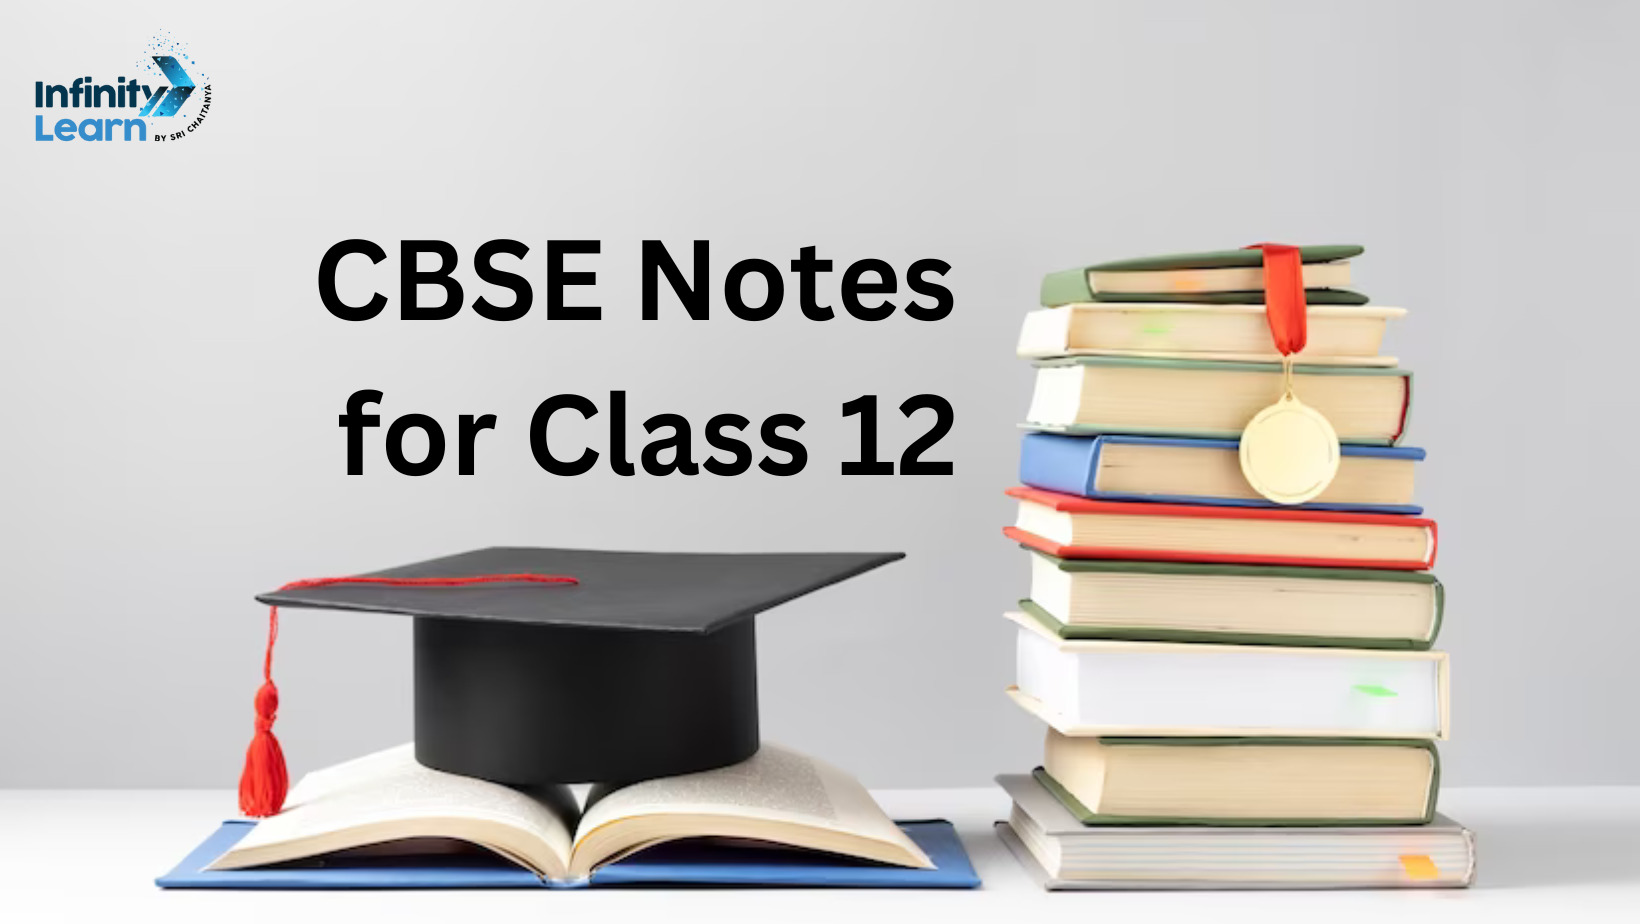 CBSE Notes for Class 12